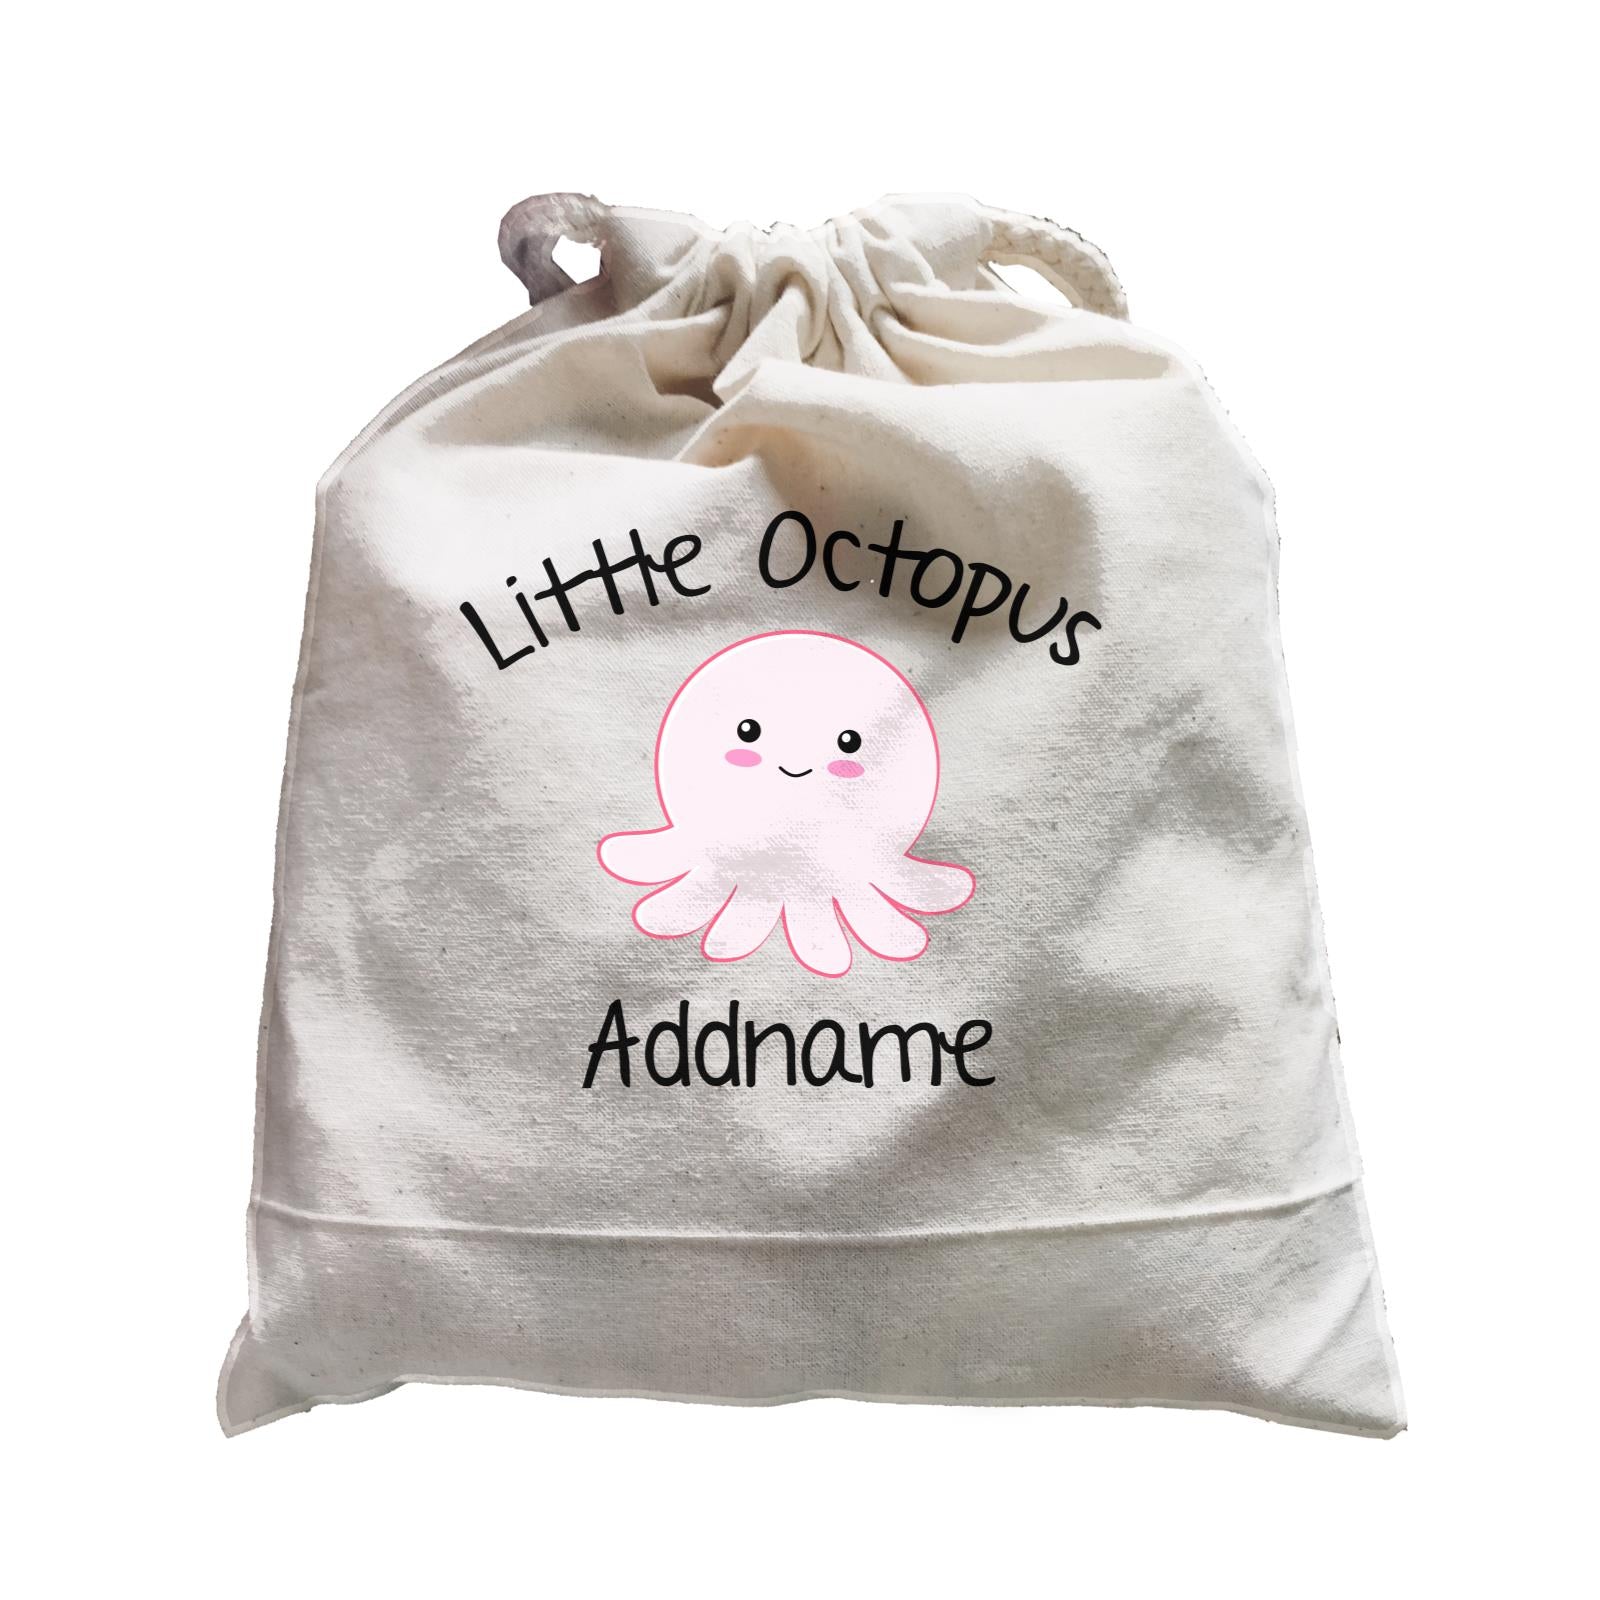 Cute Animals And Friends Series Little Octopus Boy Addname Satchel